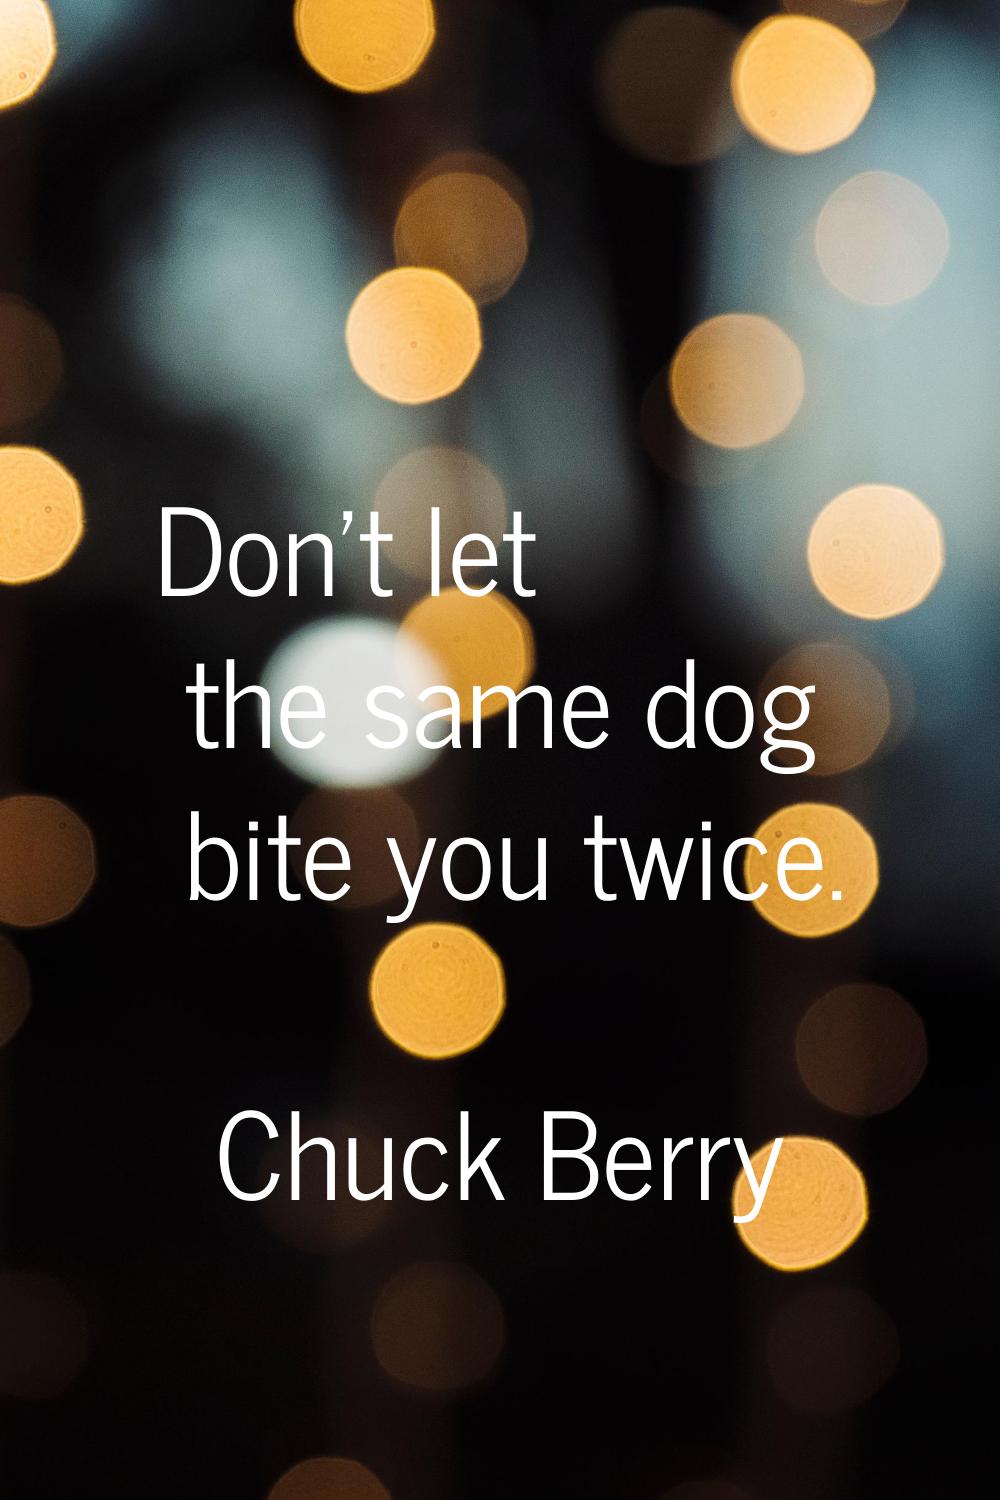 Don't let the same dog bite you twice.